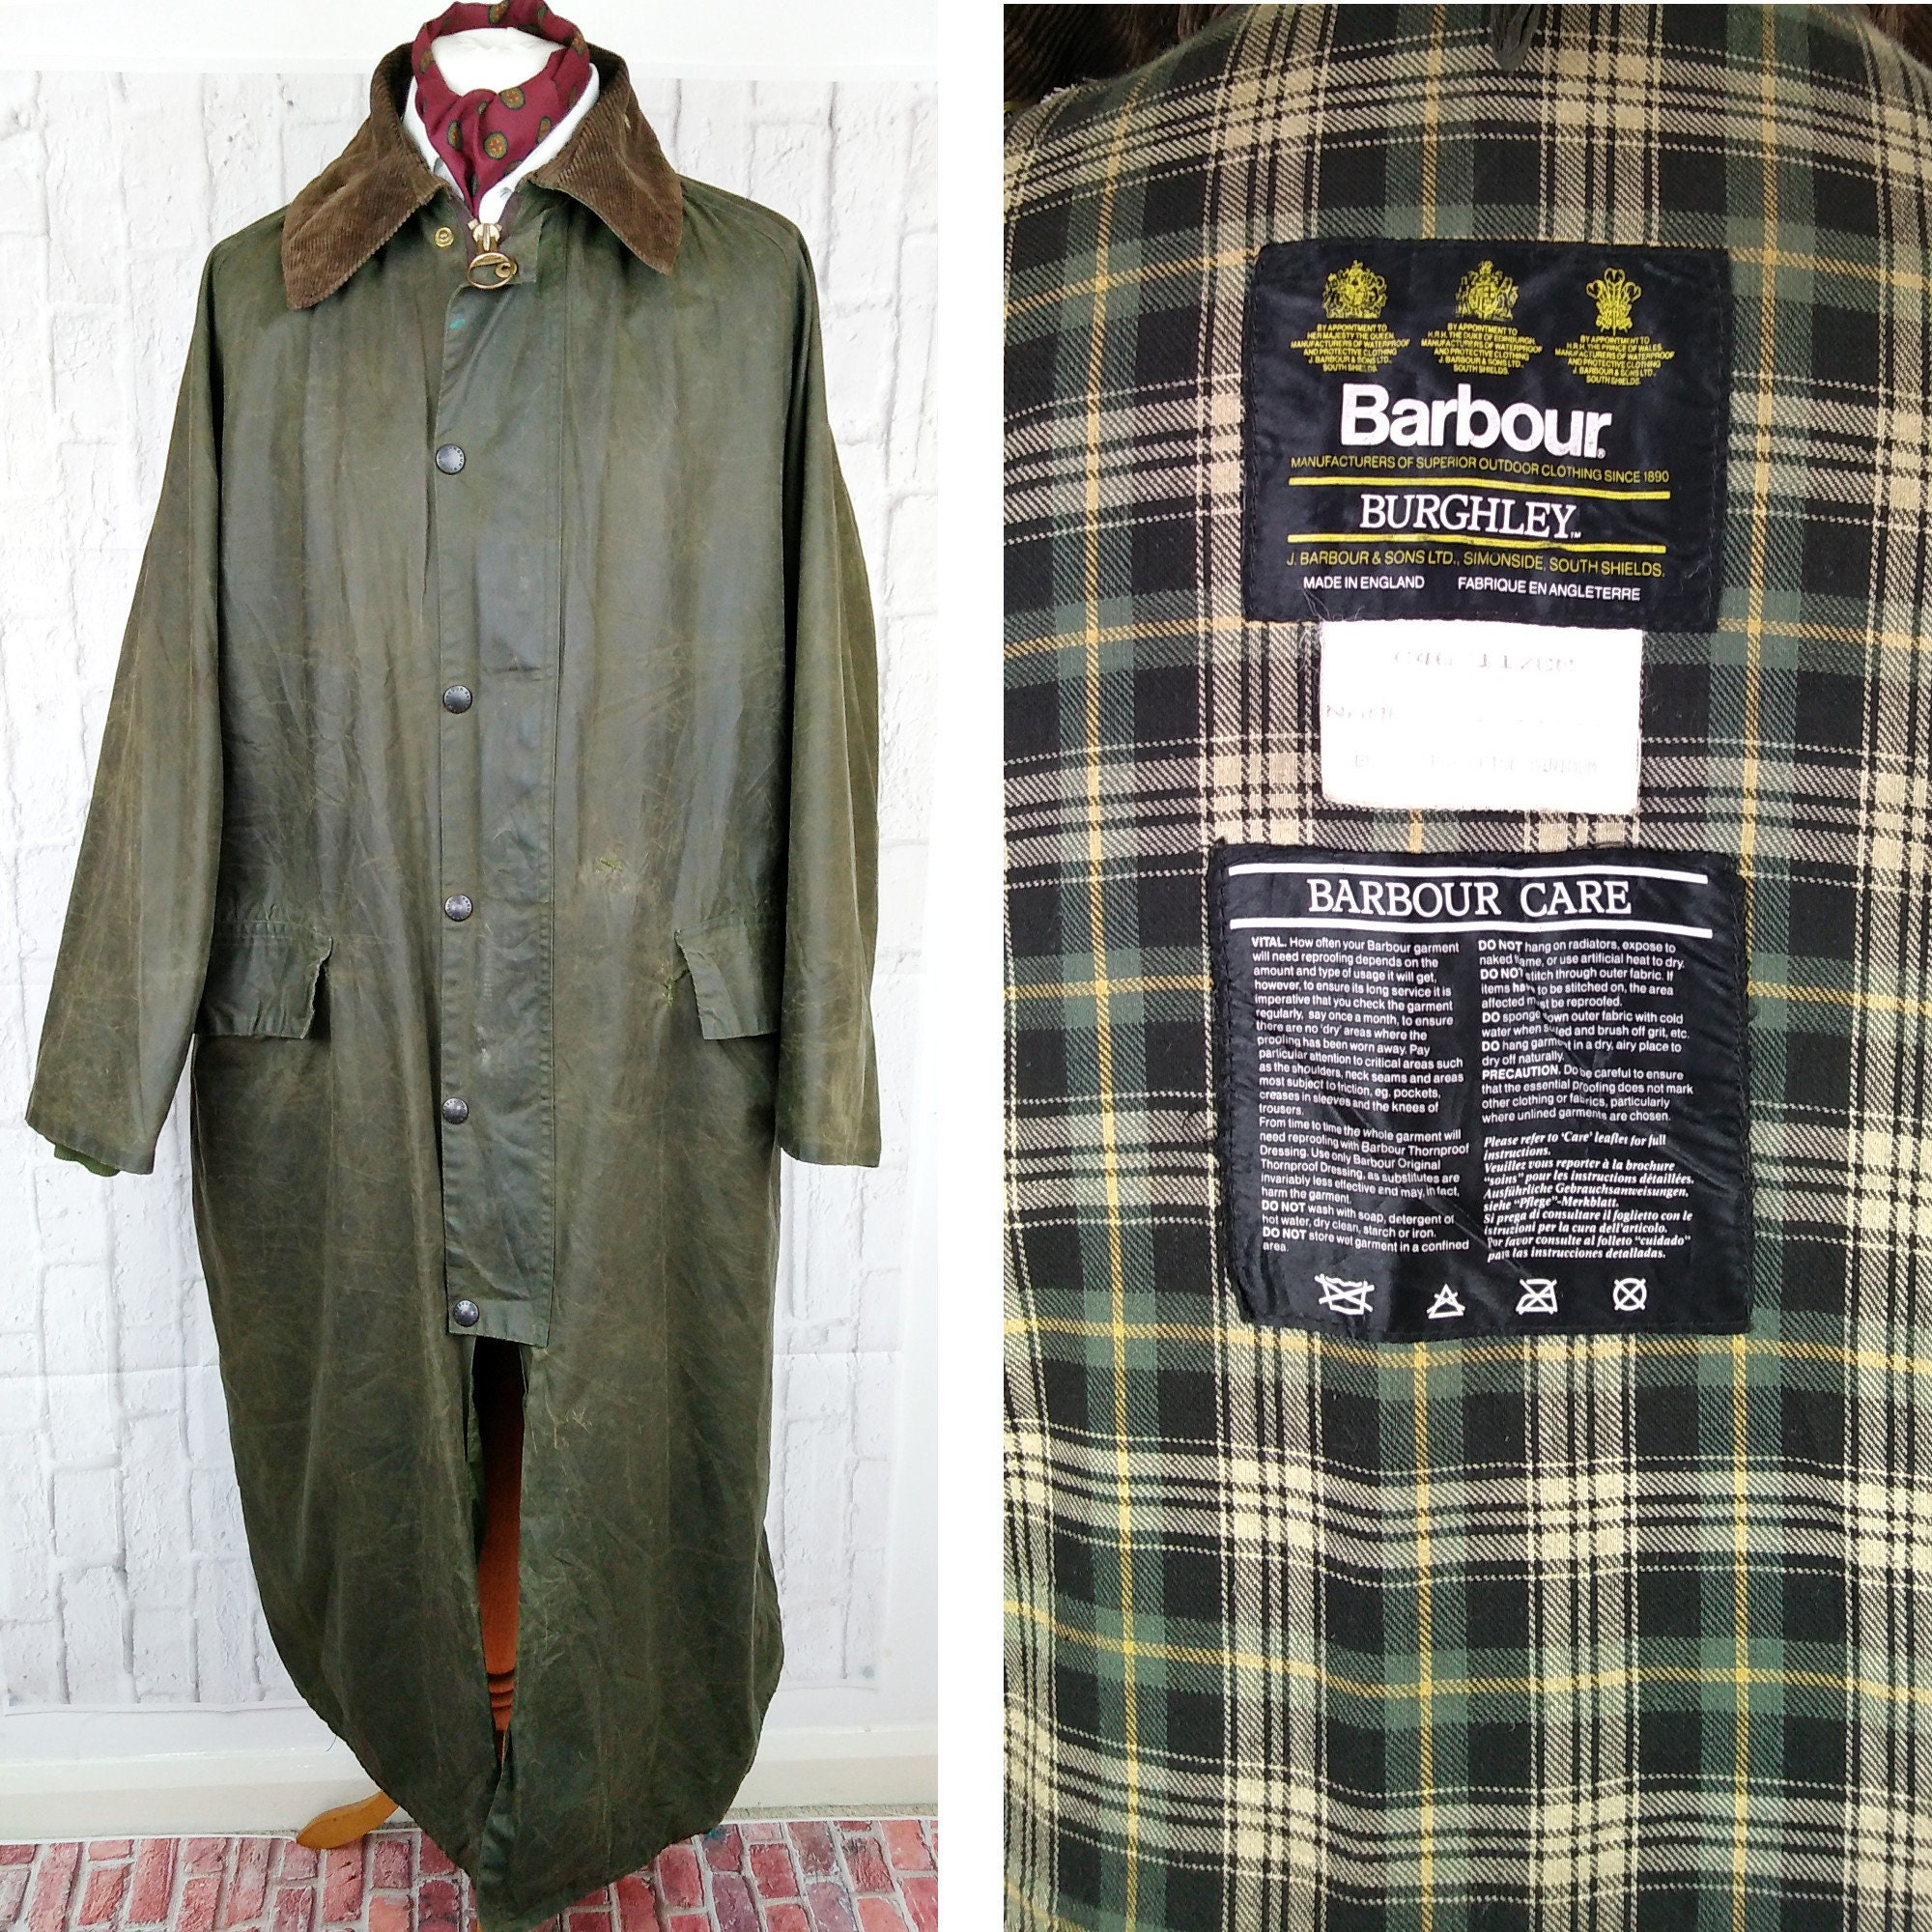 Barbour Burghley Wax Coat A160 Green Vintage Size C46/117cm - Etsy